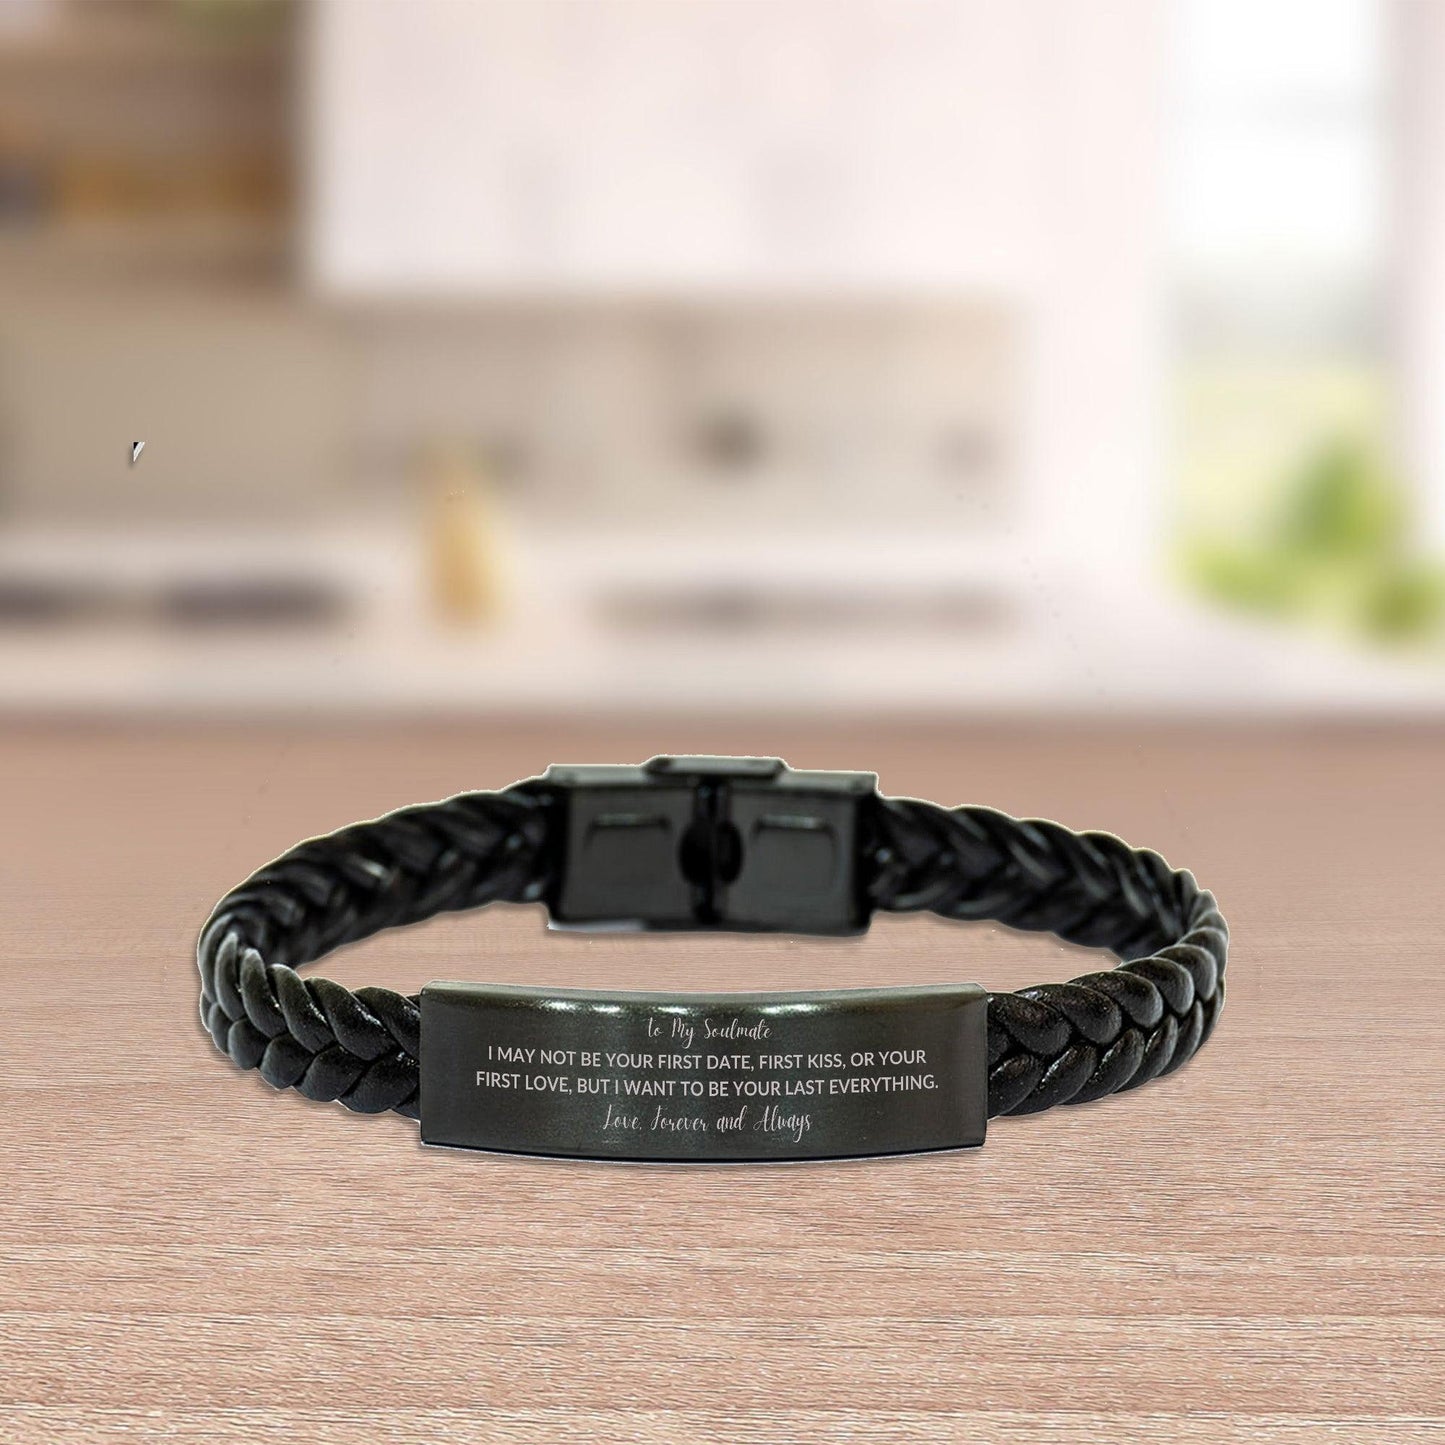 Romantic Soulmate Braided Leather Engraved Bracelet - I Want to be Your Last Everything - Birthday, Christmas Holiday, Valentine Gifts - Mallard Moon Gift Shop